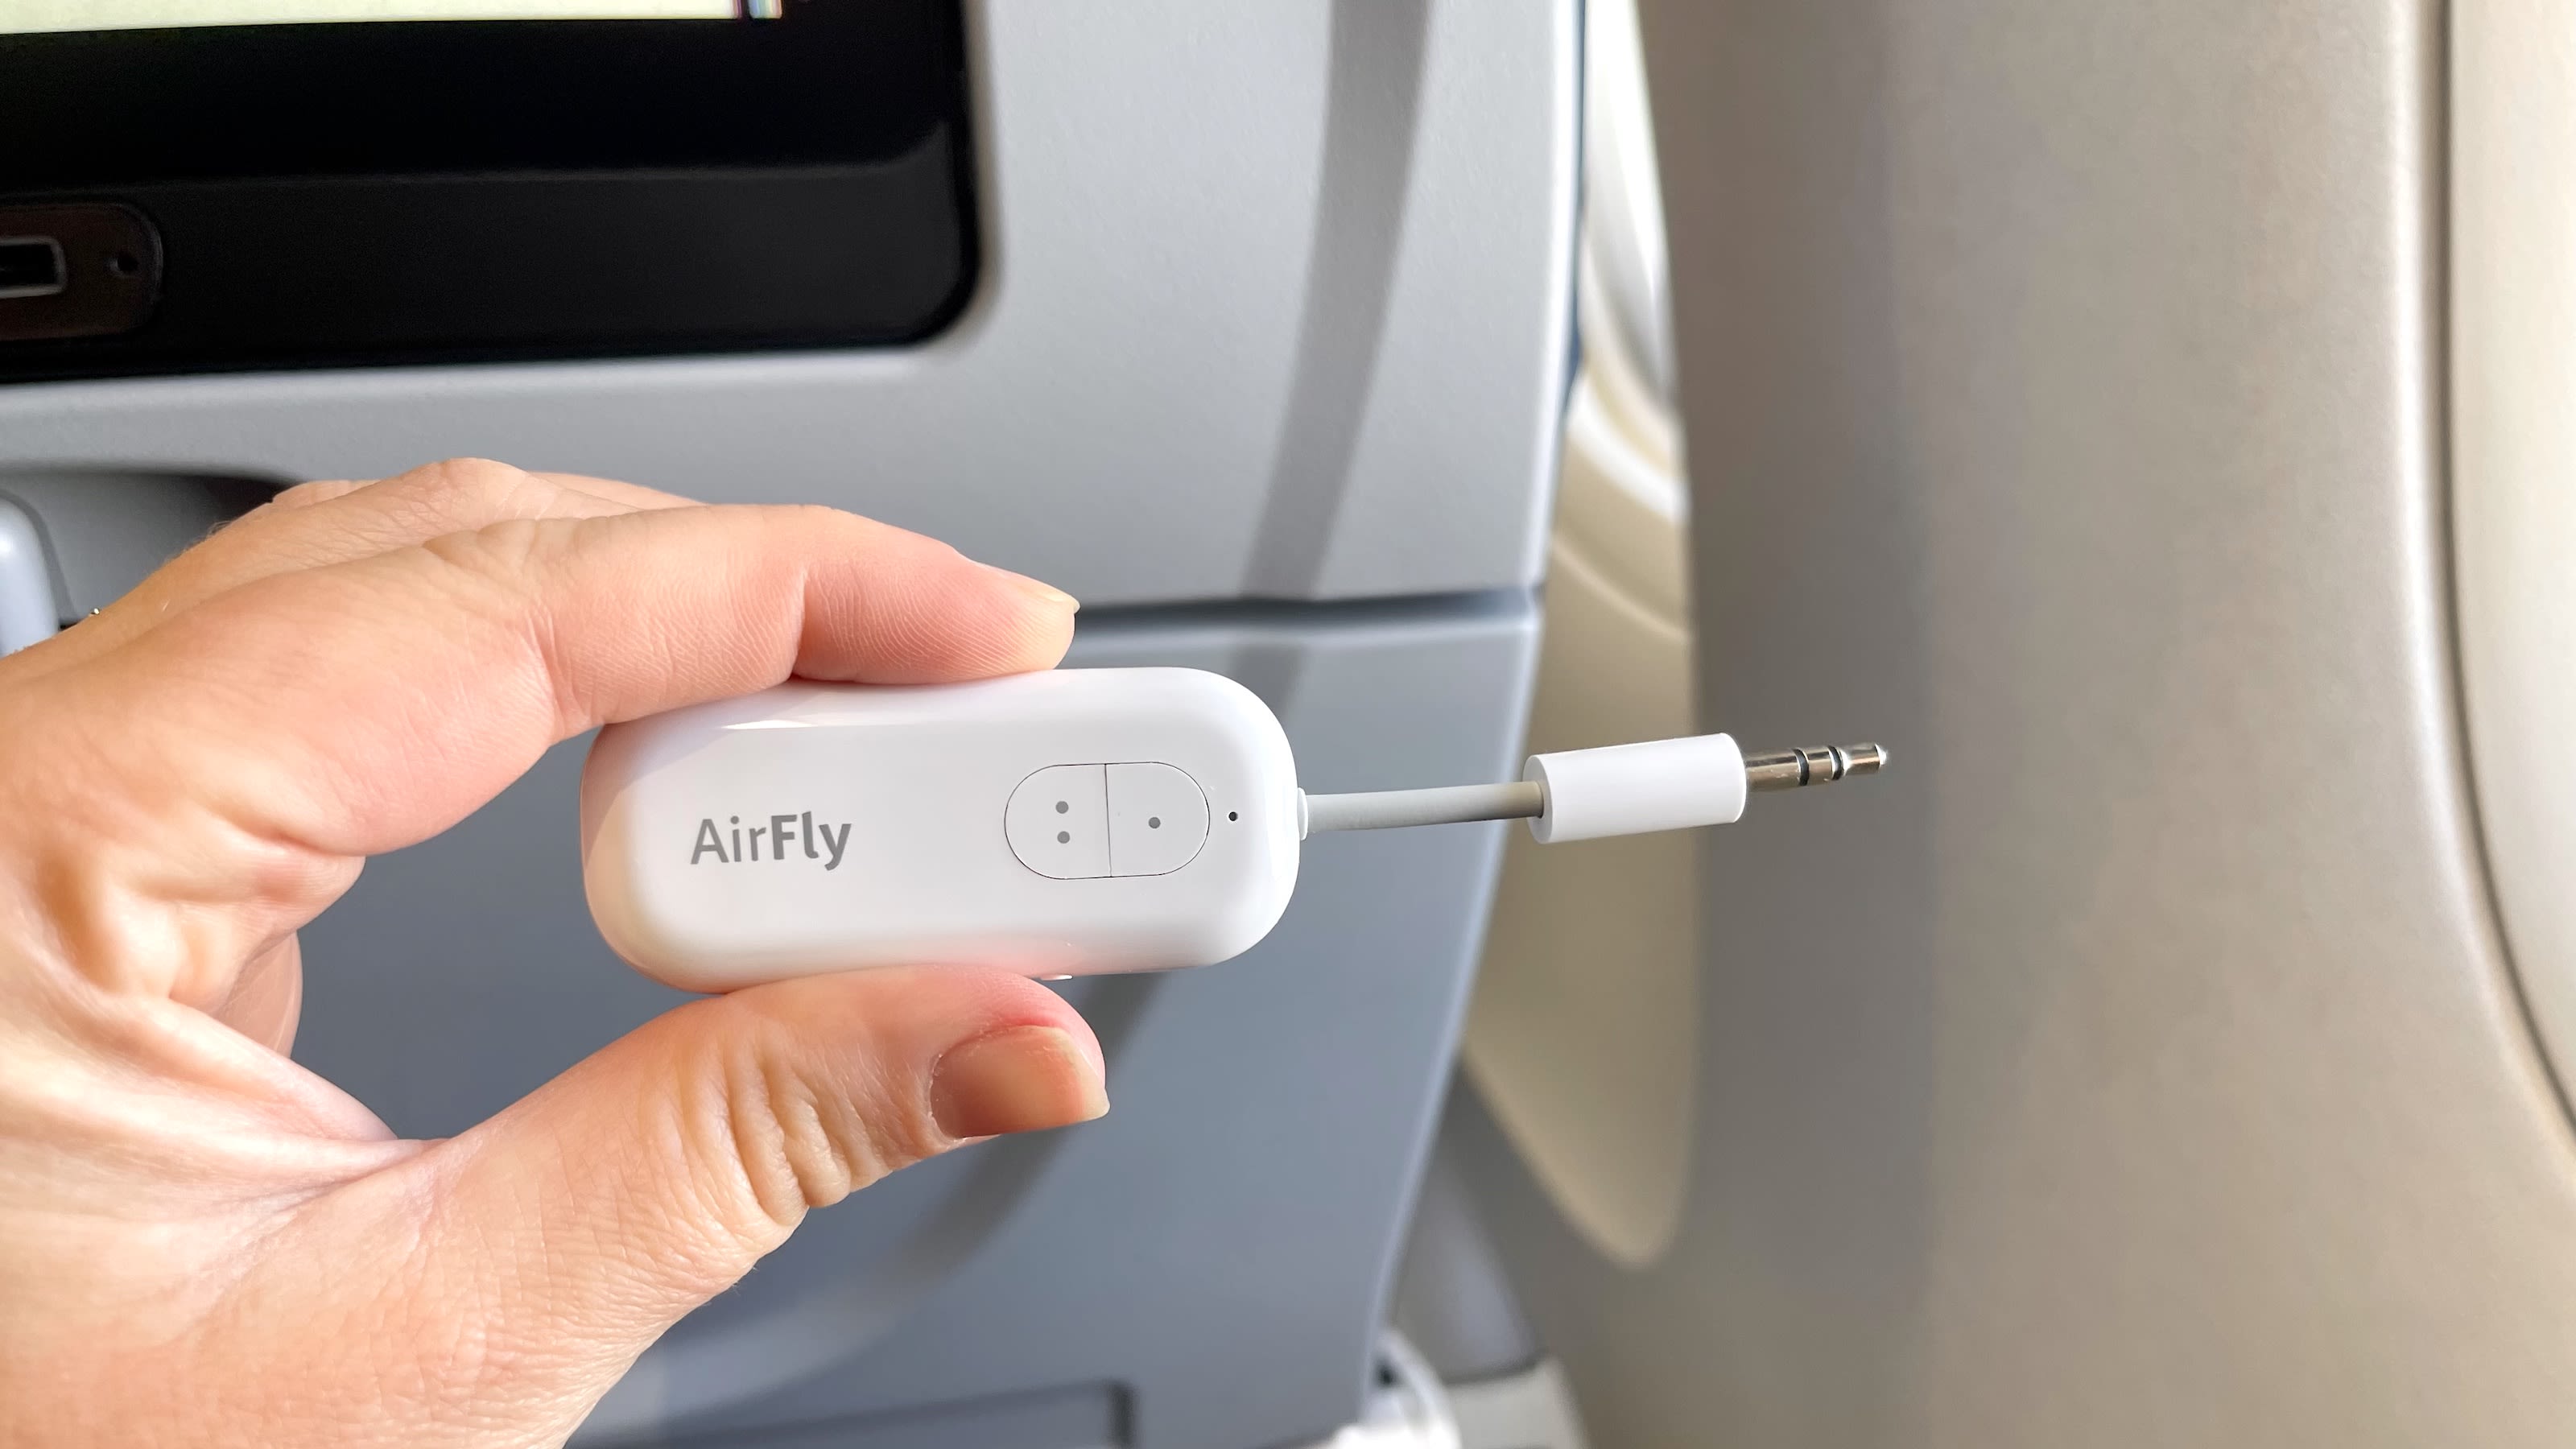 AirFly Duo adapter: Connect wireless headphones to plane | CNN Underscored